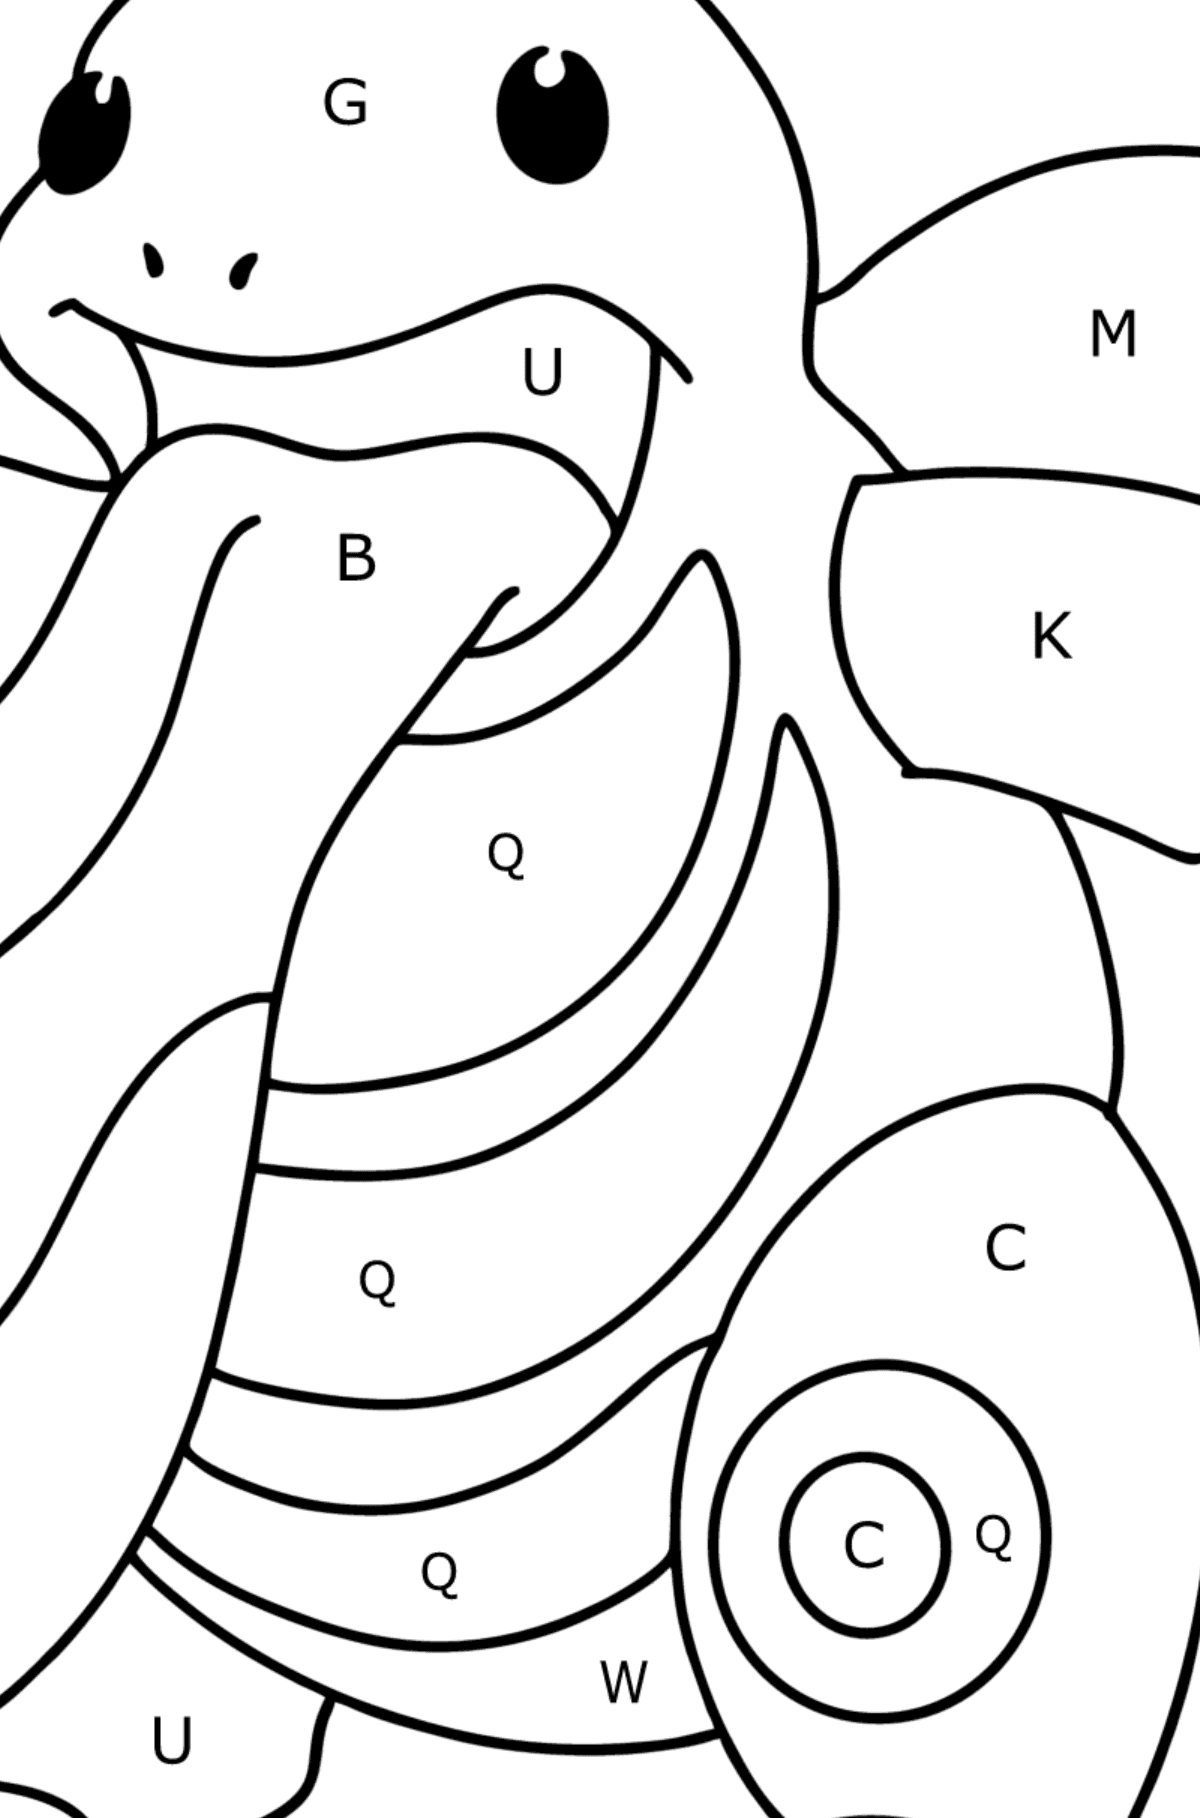 Coloring page Pokemon Go Licking - Coloring by Letters for Kids